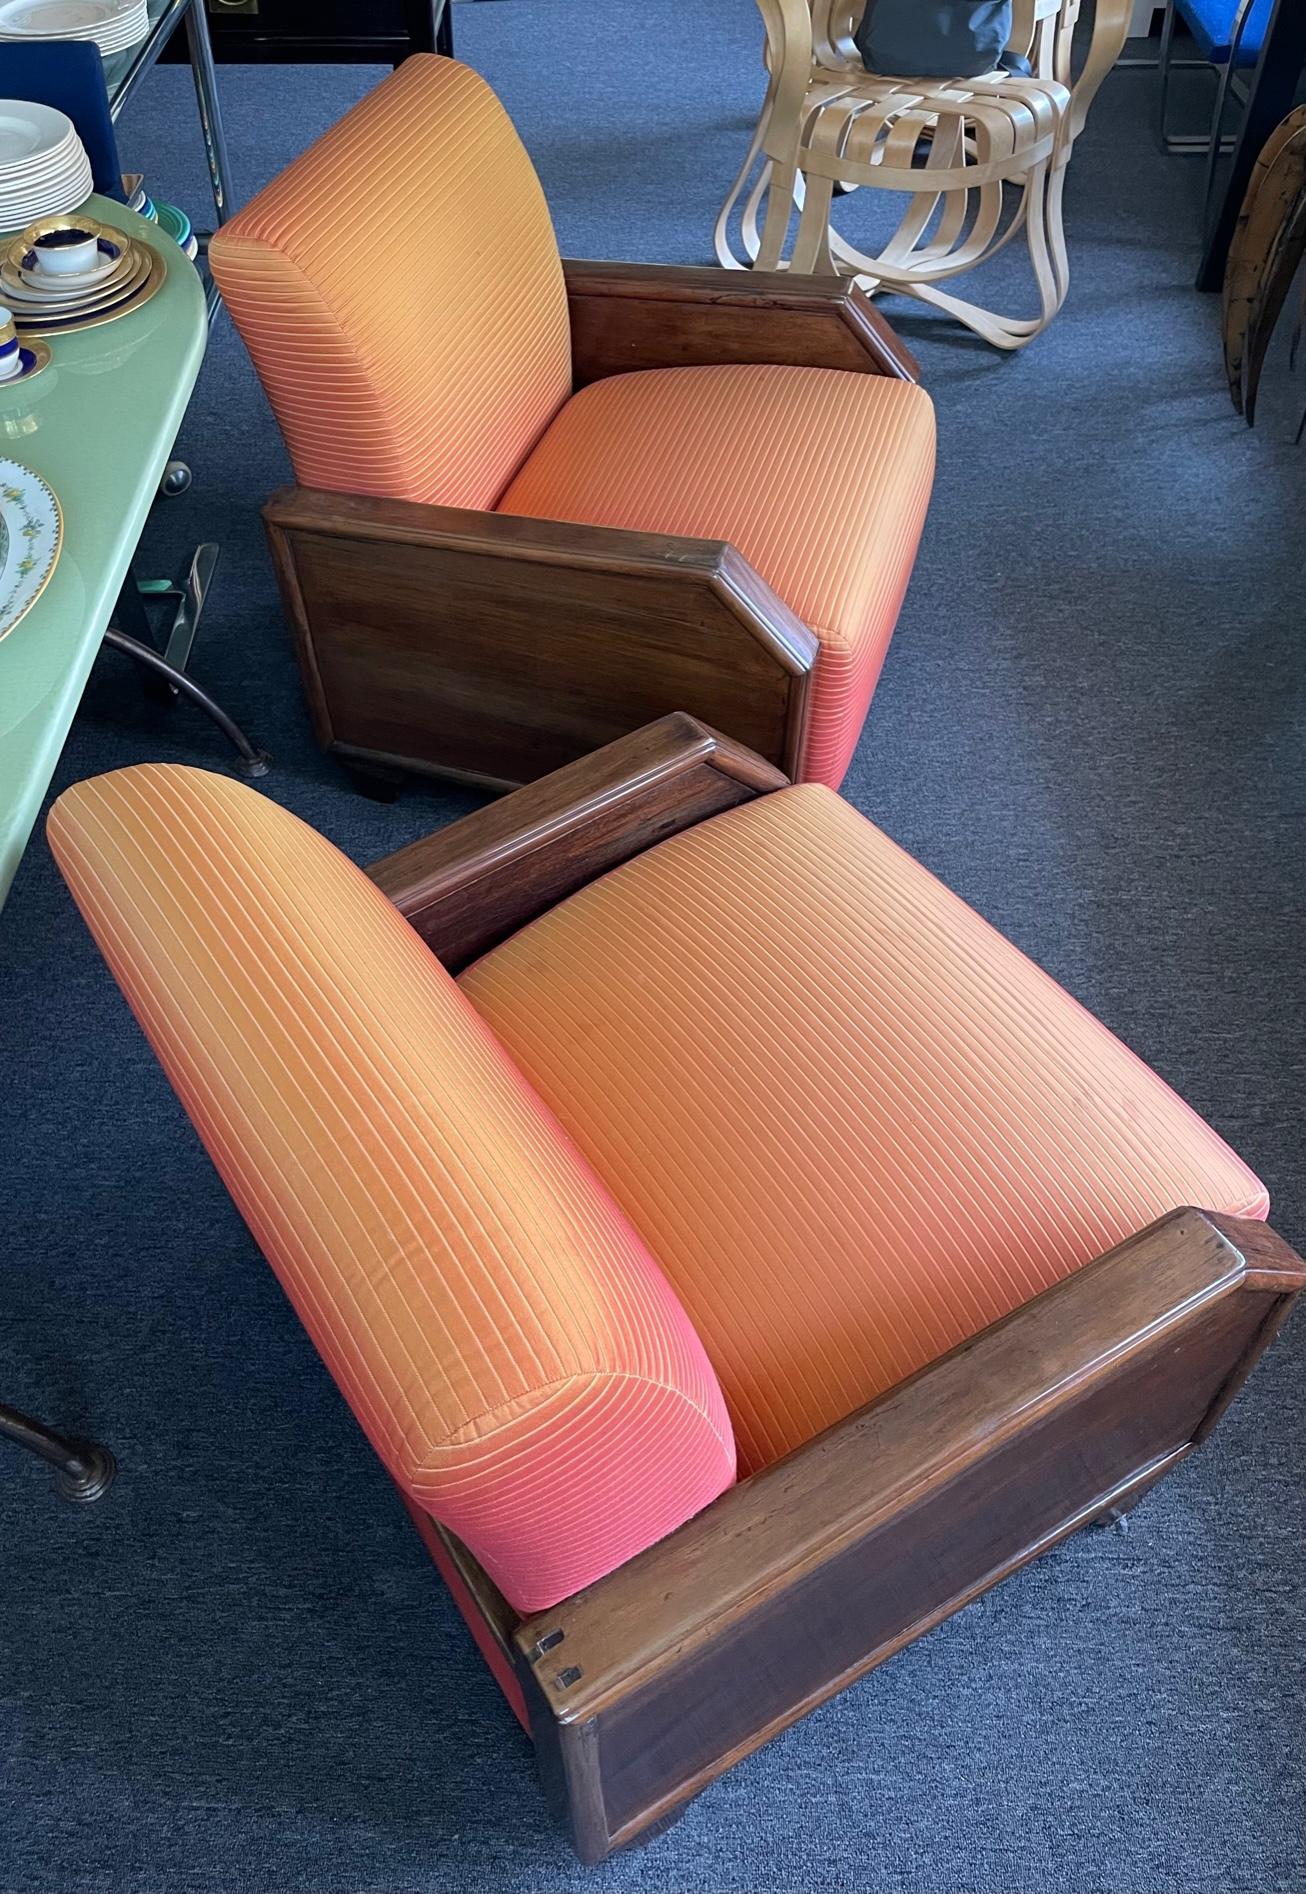 A pair of upholstered large French Art Deco club chairs. With their angular look and upholstered Art Deco inspired fabric, these arm chairs inspired by the style of Emile-Jacques Ruhlmann are beautiful from the 1930s and very comfortable with a seat